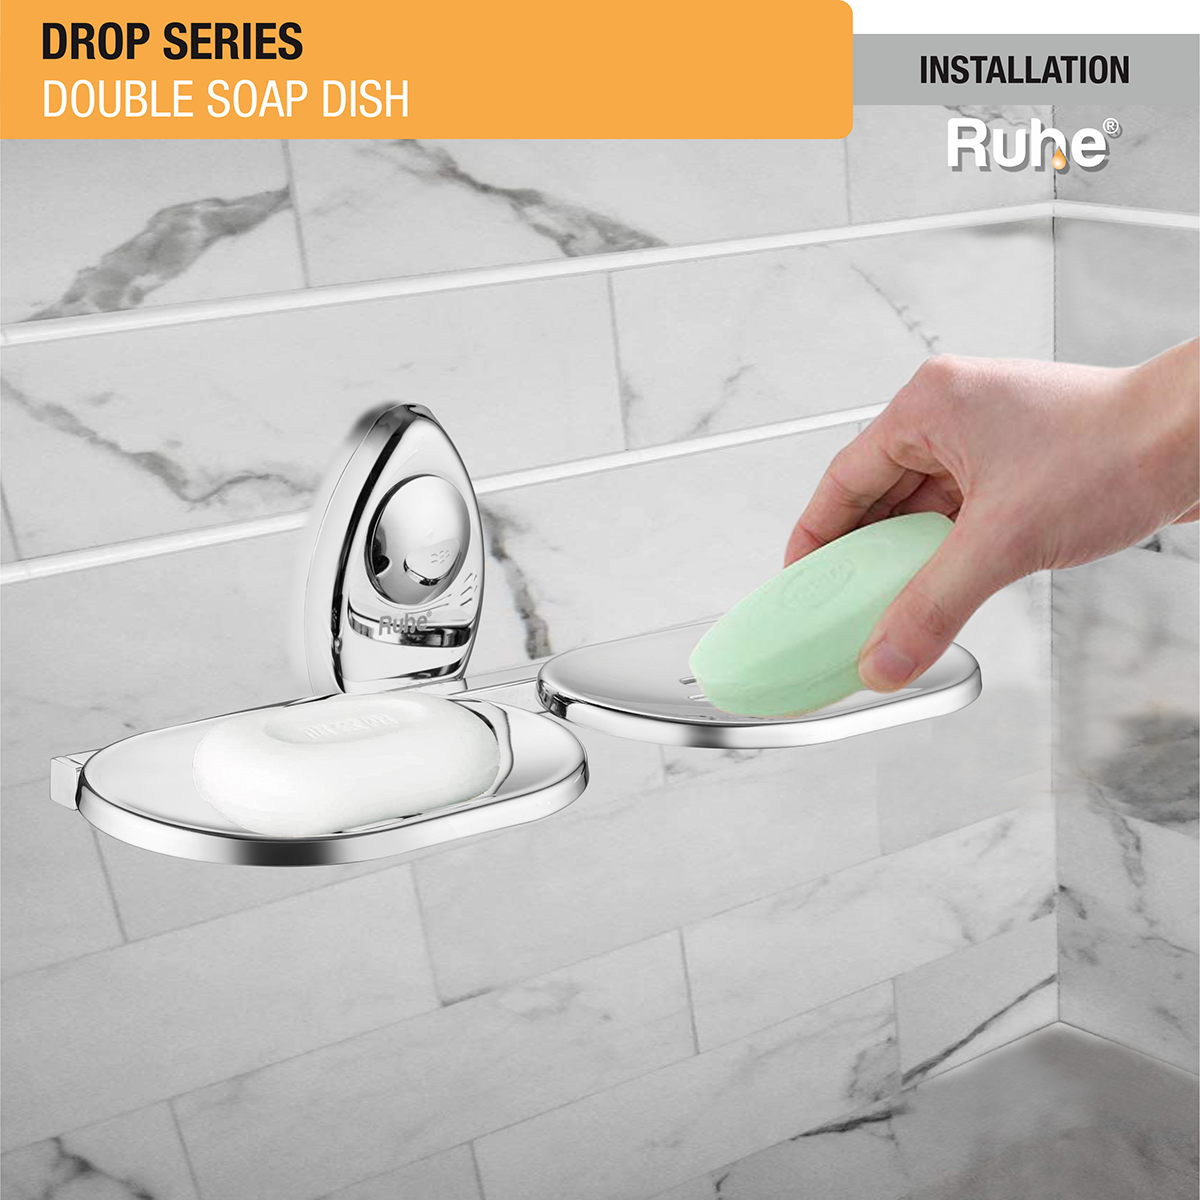 Drop Stainless Steel Double Soap Dish installation